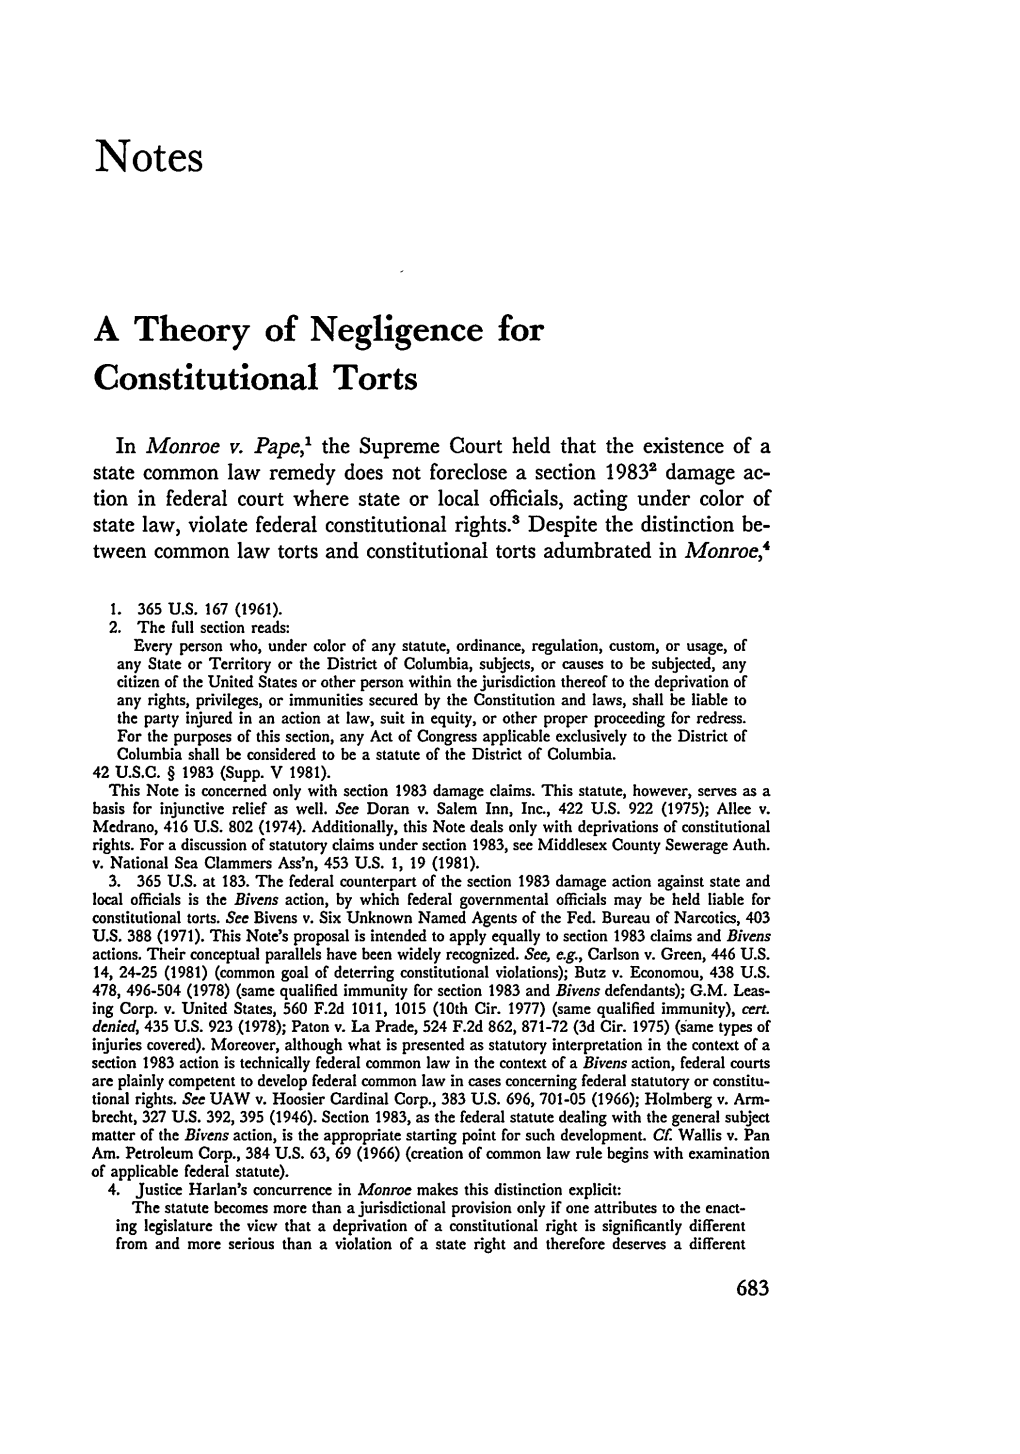 A Theory of Negligence for Constitutional Torts